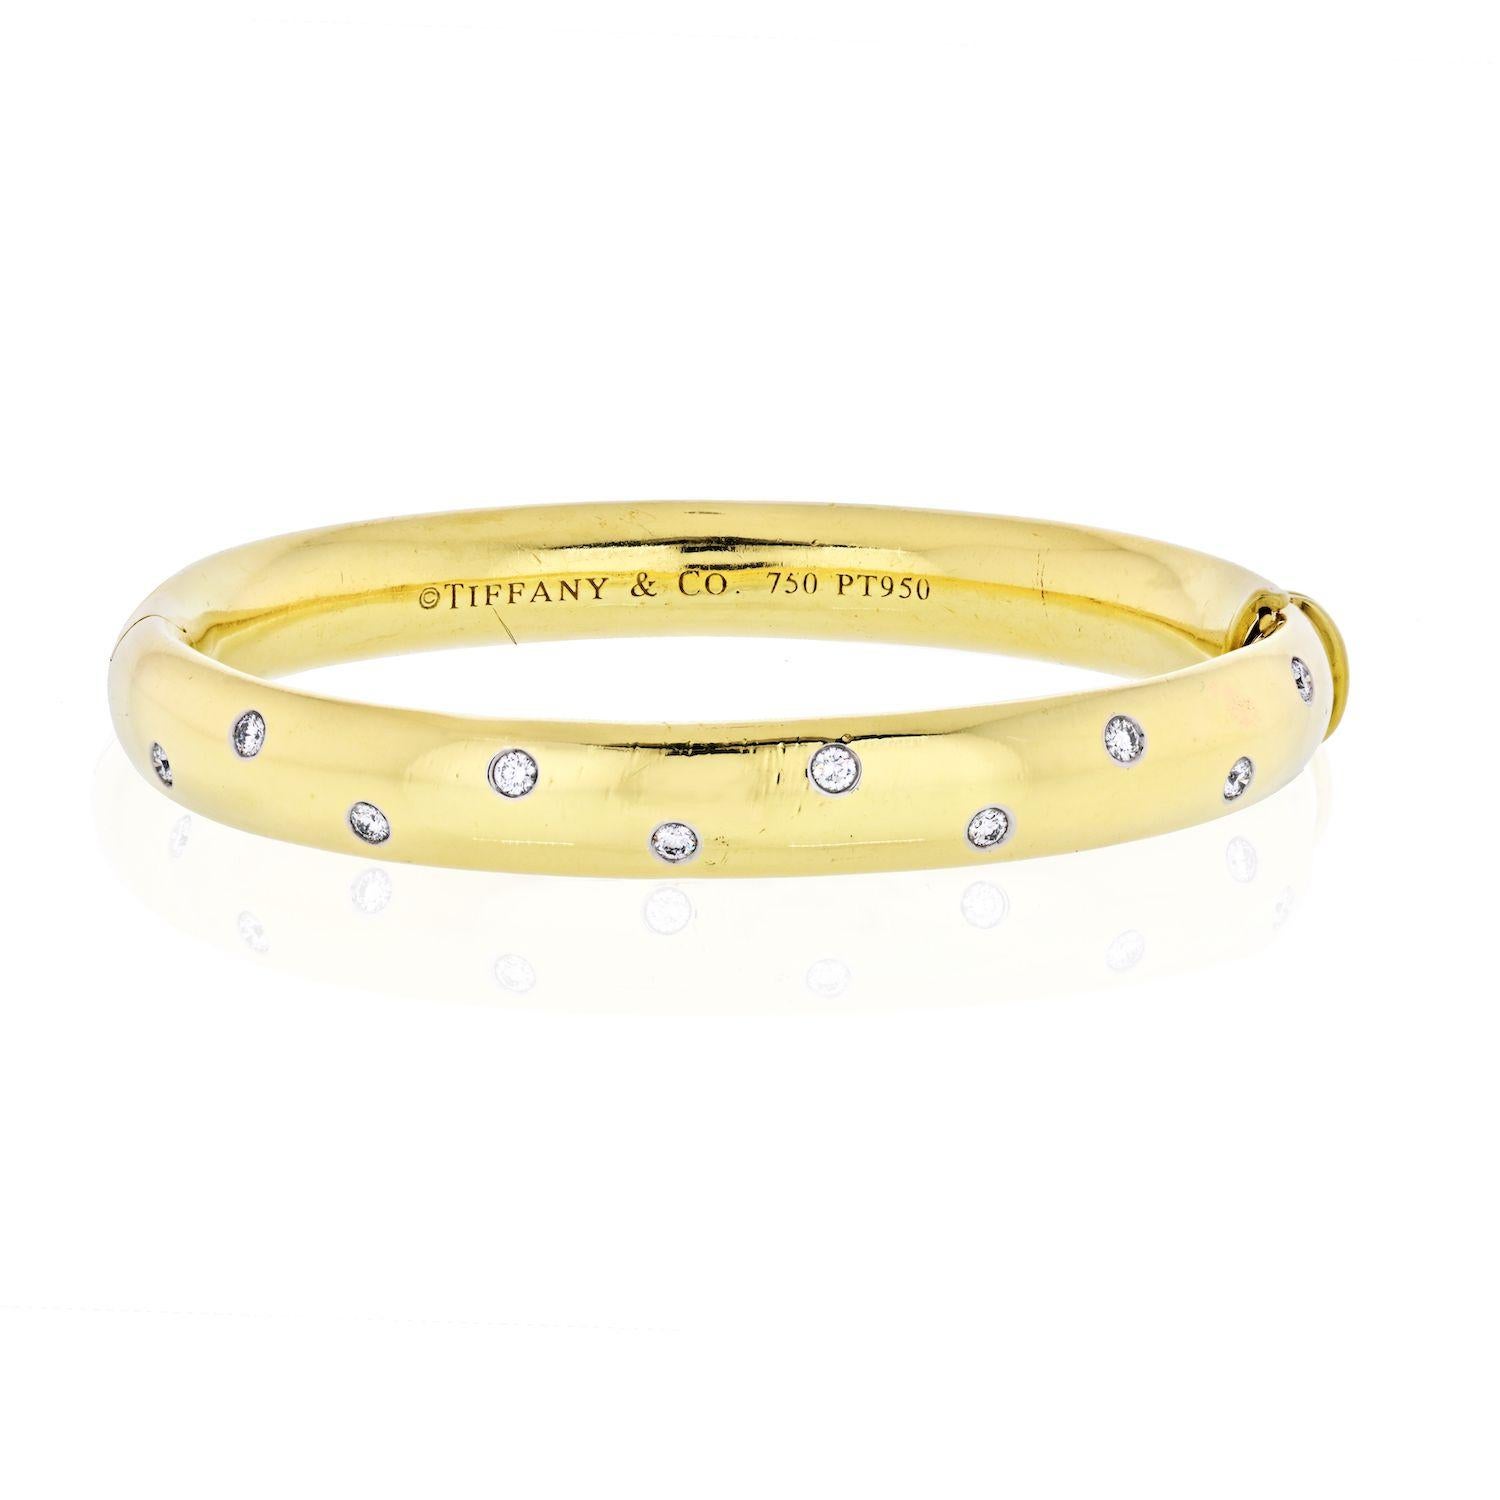 Tiffany & Co. Etoile 18K Yellow Gold Diamond Bangle Bracelet

This Tiffany & Co. Etoile bangle with 10 round cut diamonds, is in absolutely perfect condition, having recently been re-polished by our specialist craftsmen.

Sparkling G/VS diamonds sit